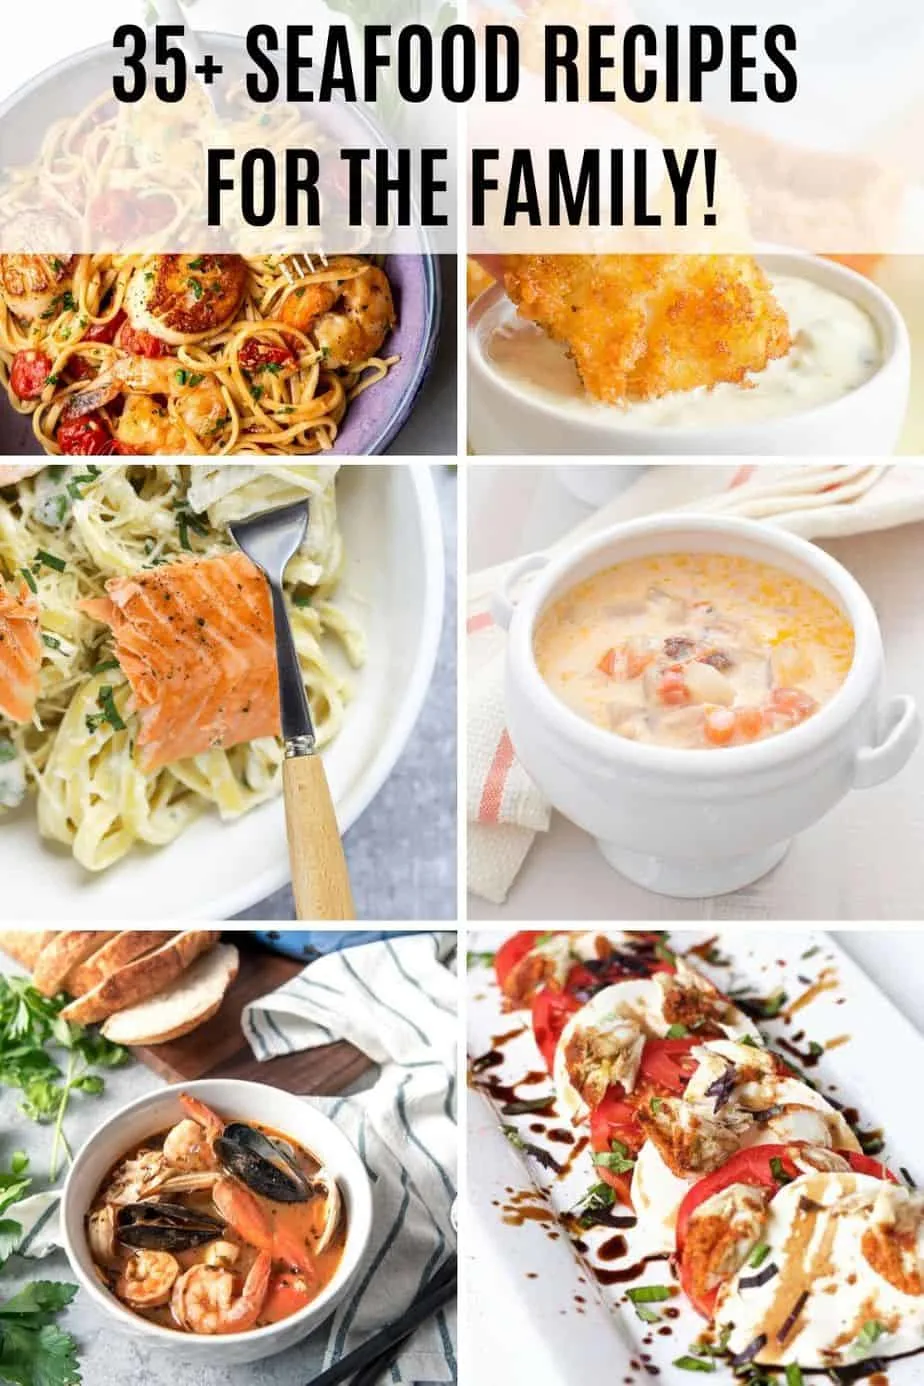 35+ impressive seafood recipes for the family